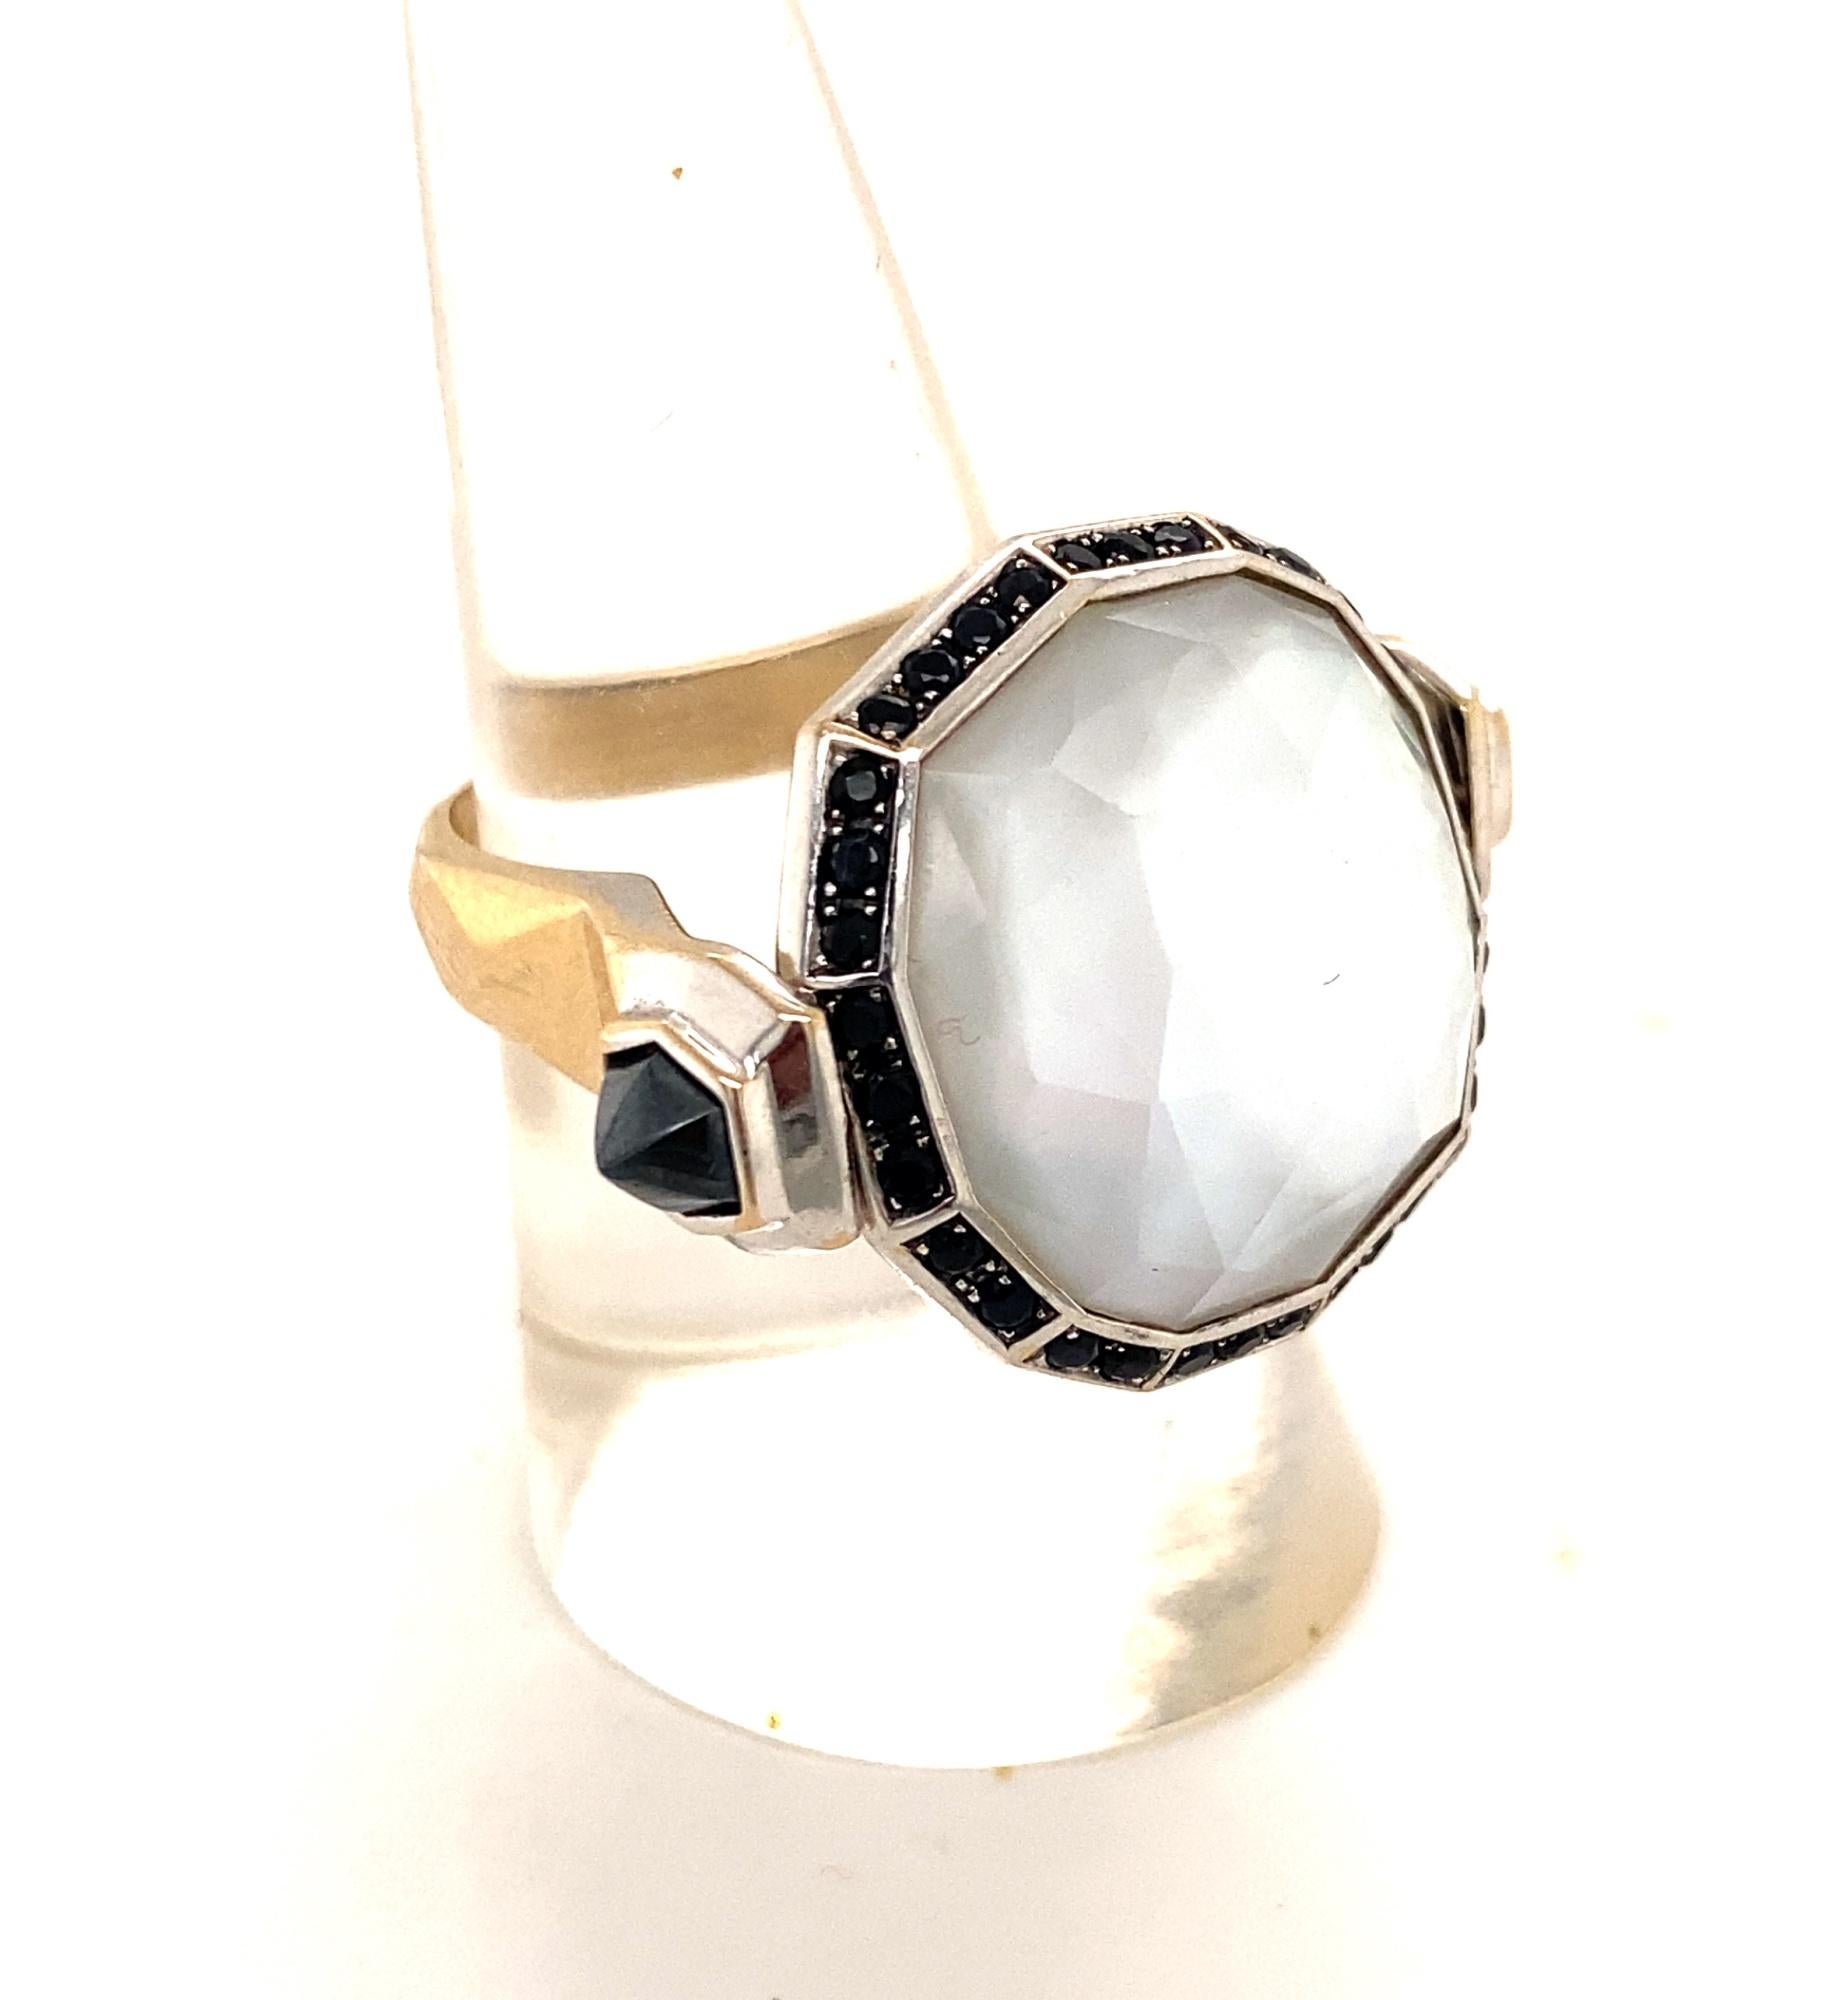 This is a beautiful ring made by Important English designer Stephen Webster.  The ring has a unique flip design that flips revealing fancy cut mother of pearl with black diamonds and the other side black quartz with white diamonds.  The ring is